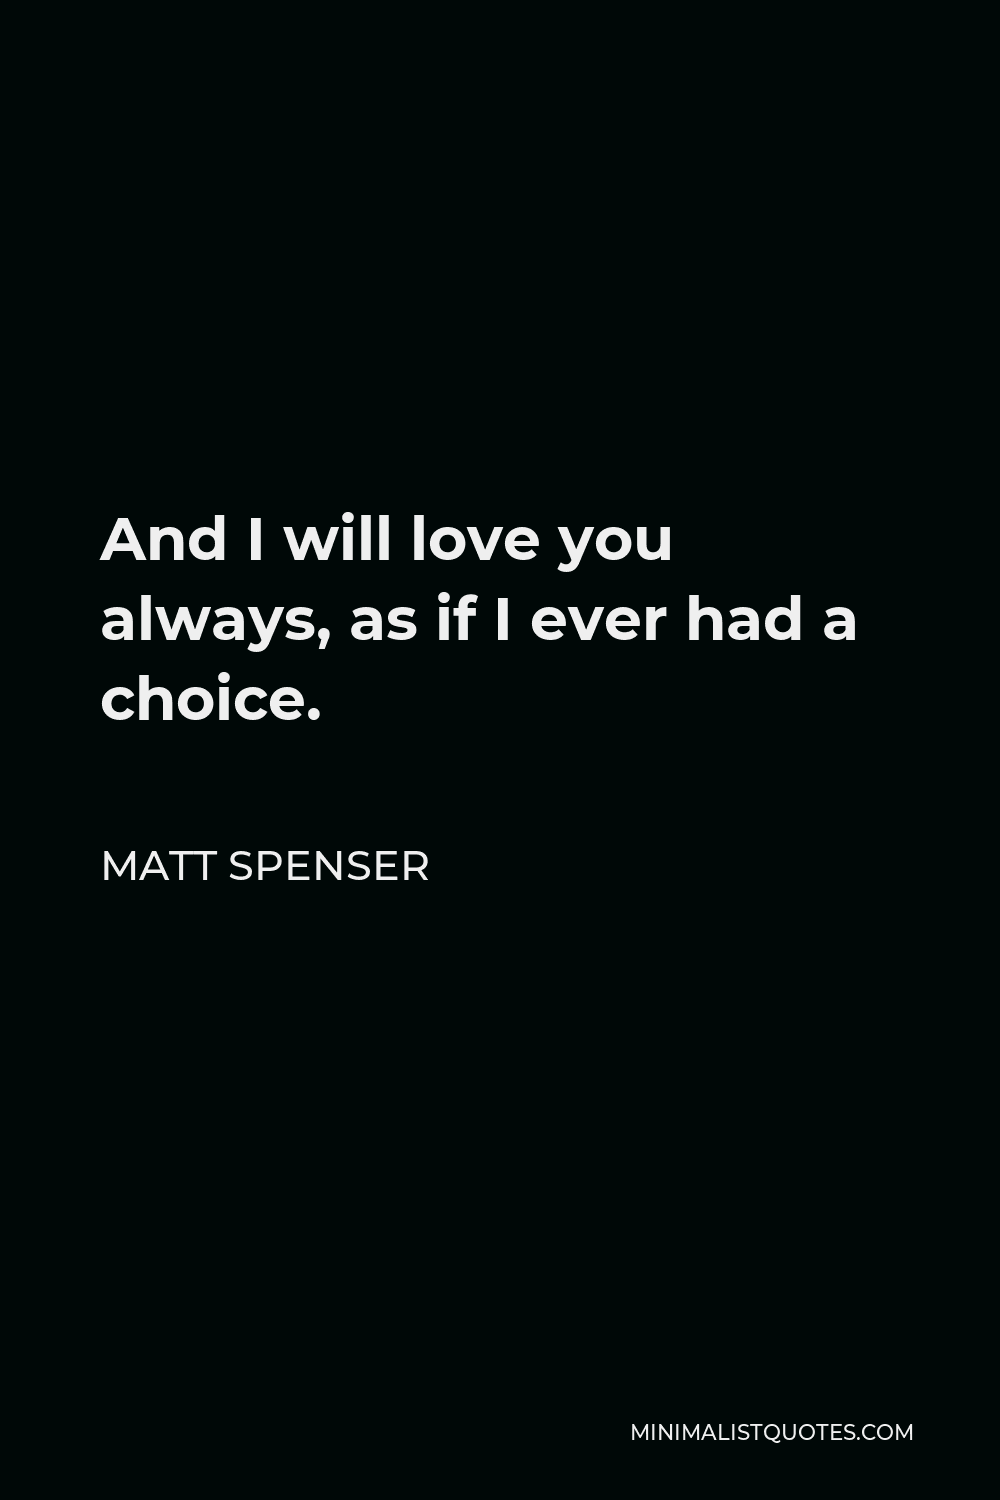 Matt Spenser Quote - And I will love you always, as if I ever had a choice.